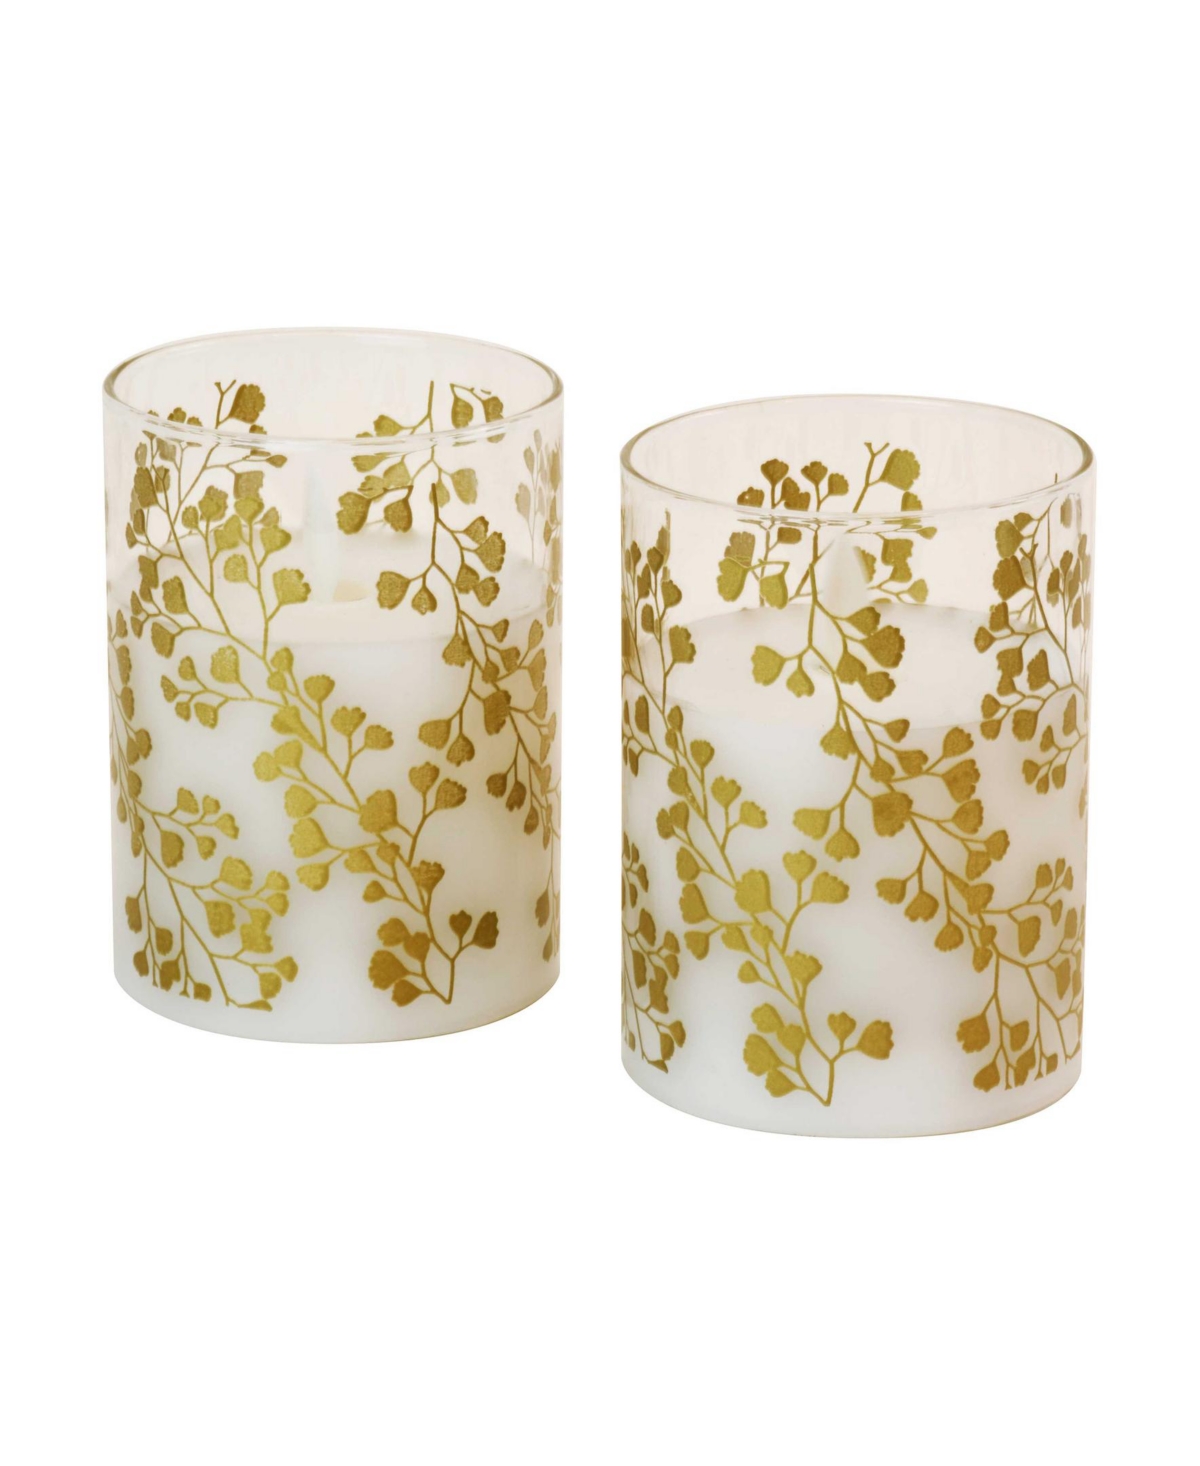 Battery Operated Fern Led Glass Candles with Moving Flame, Set of 2 - Silver-Tone